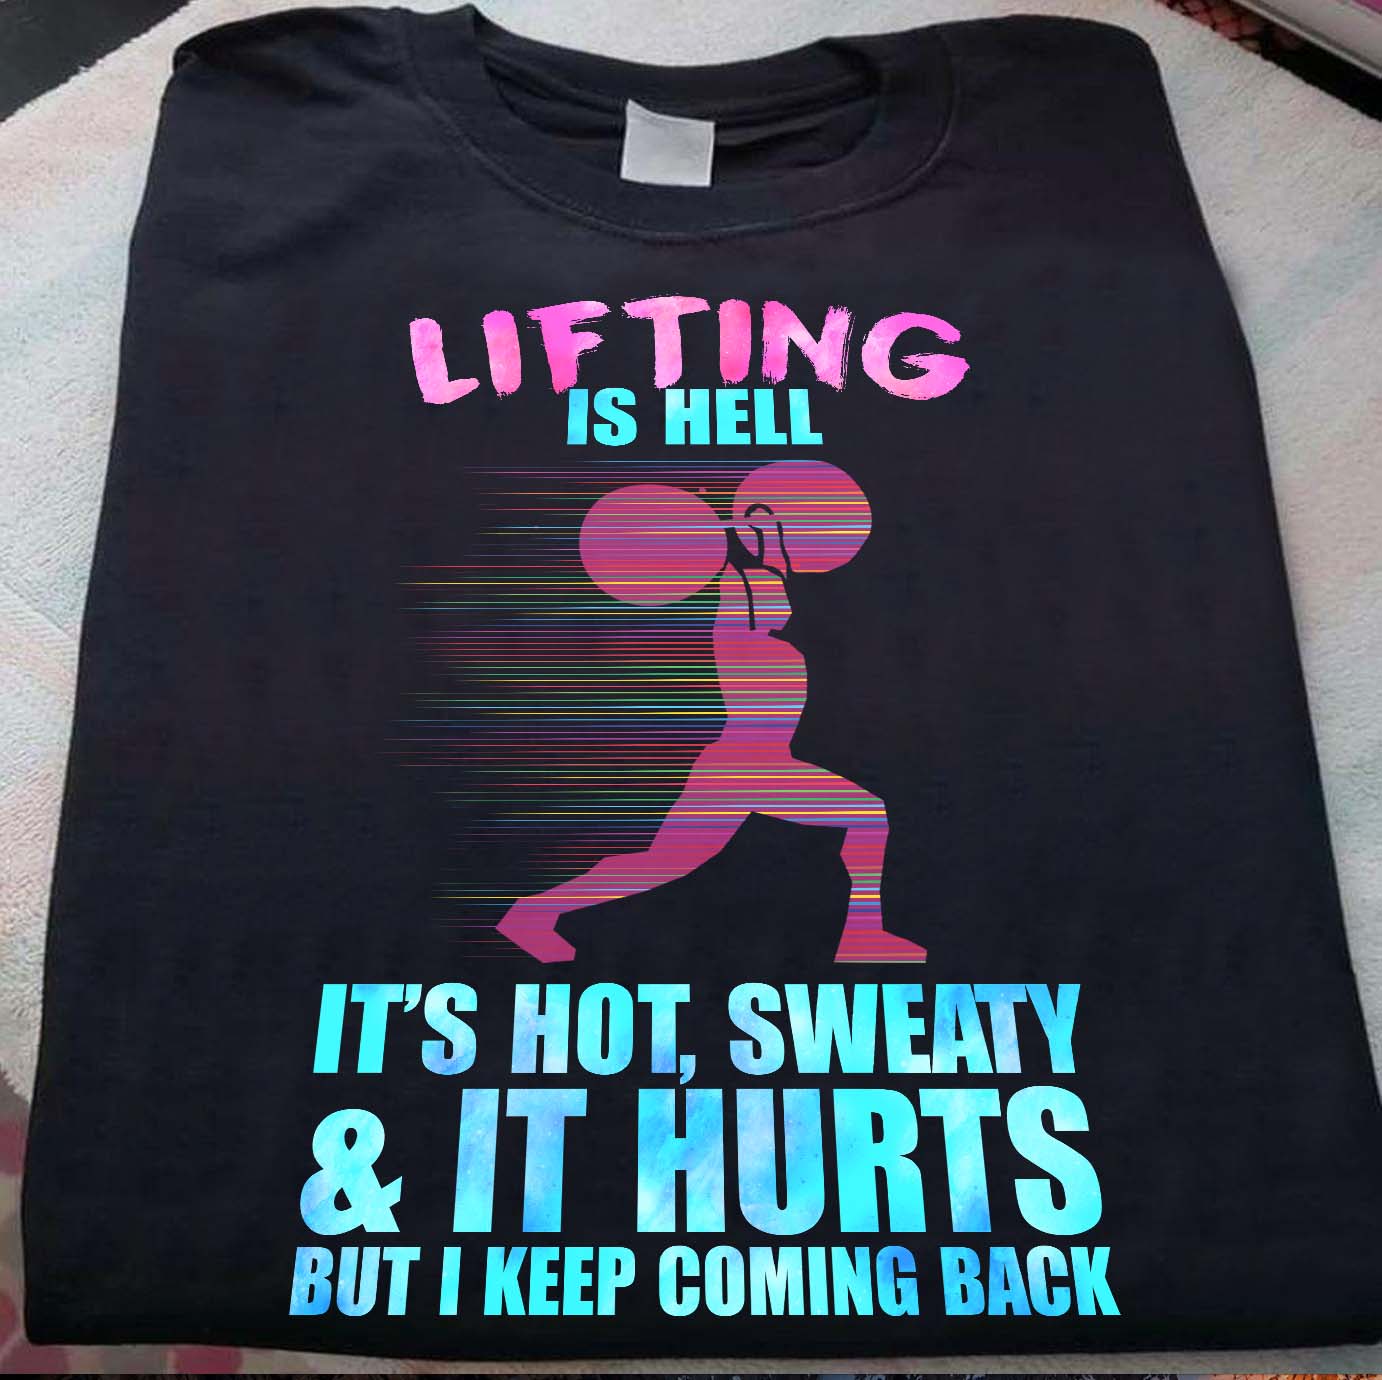 Lifting is hell it's hot, sweaty it hurts but I keep coming back - Lifting lover